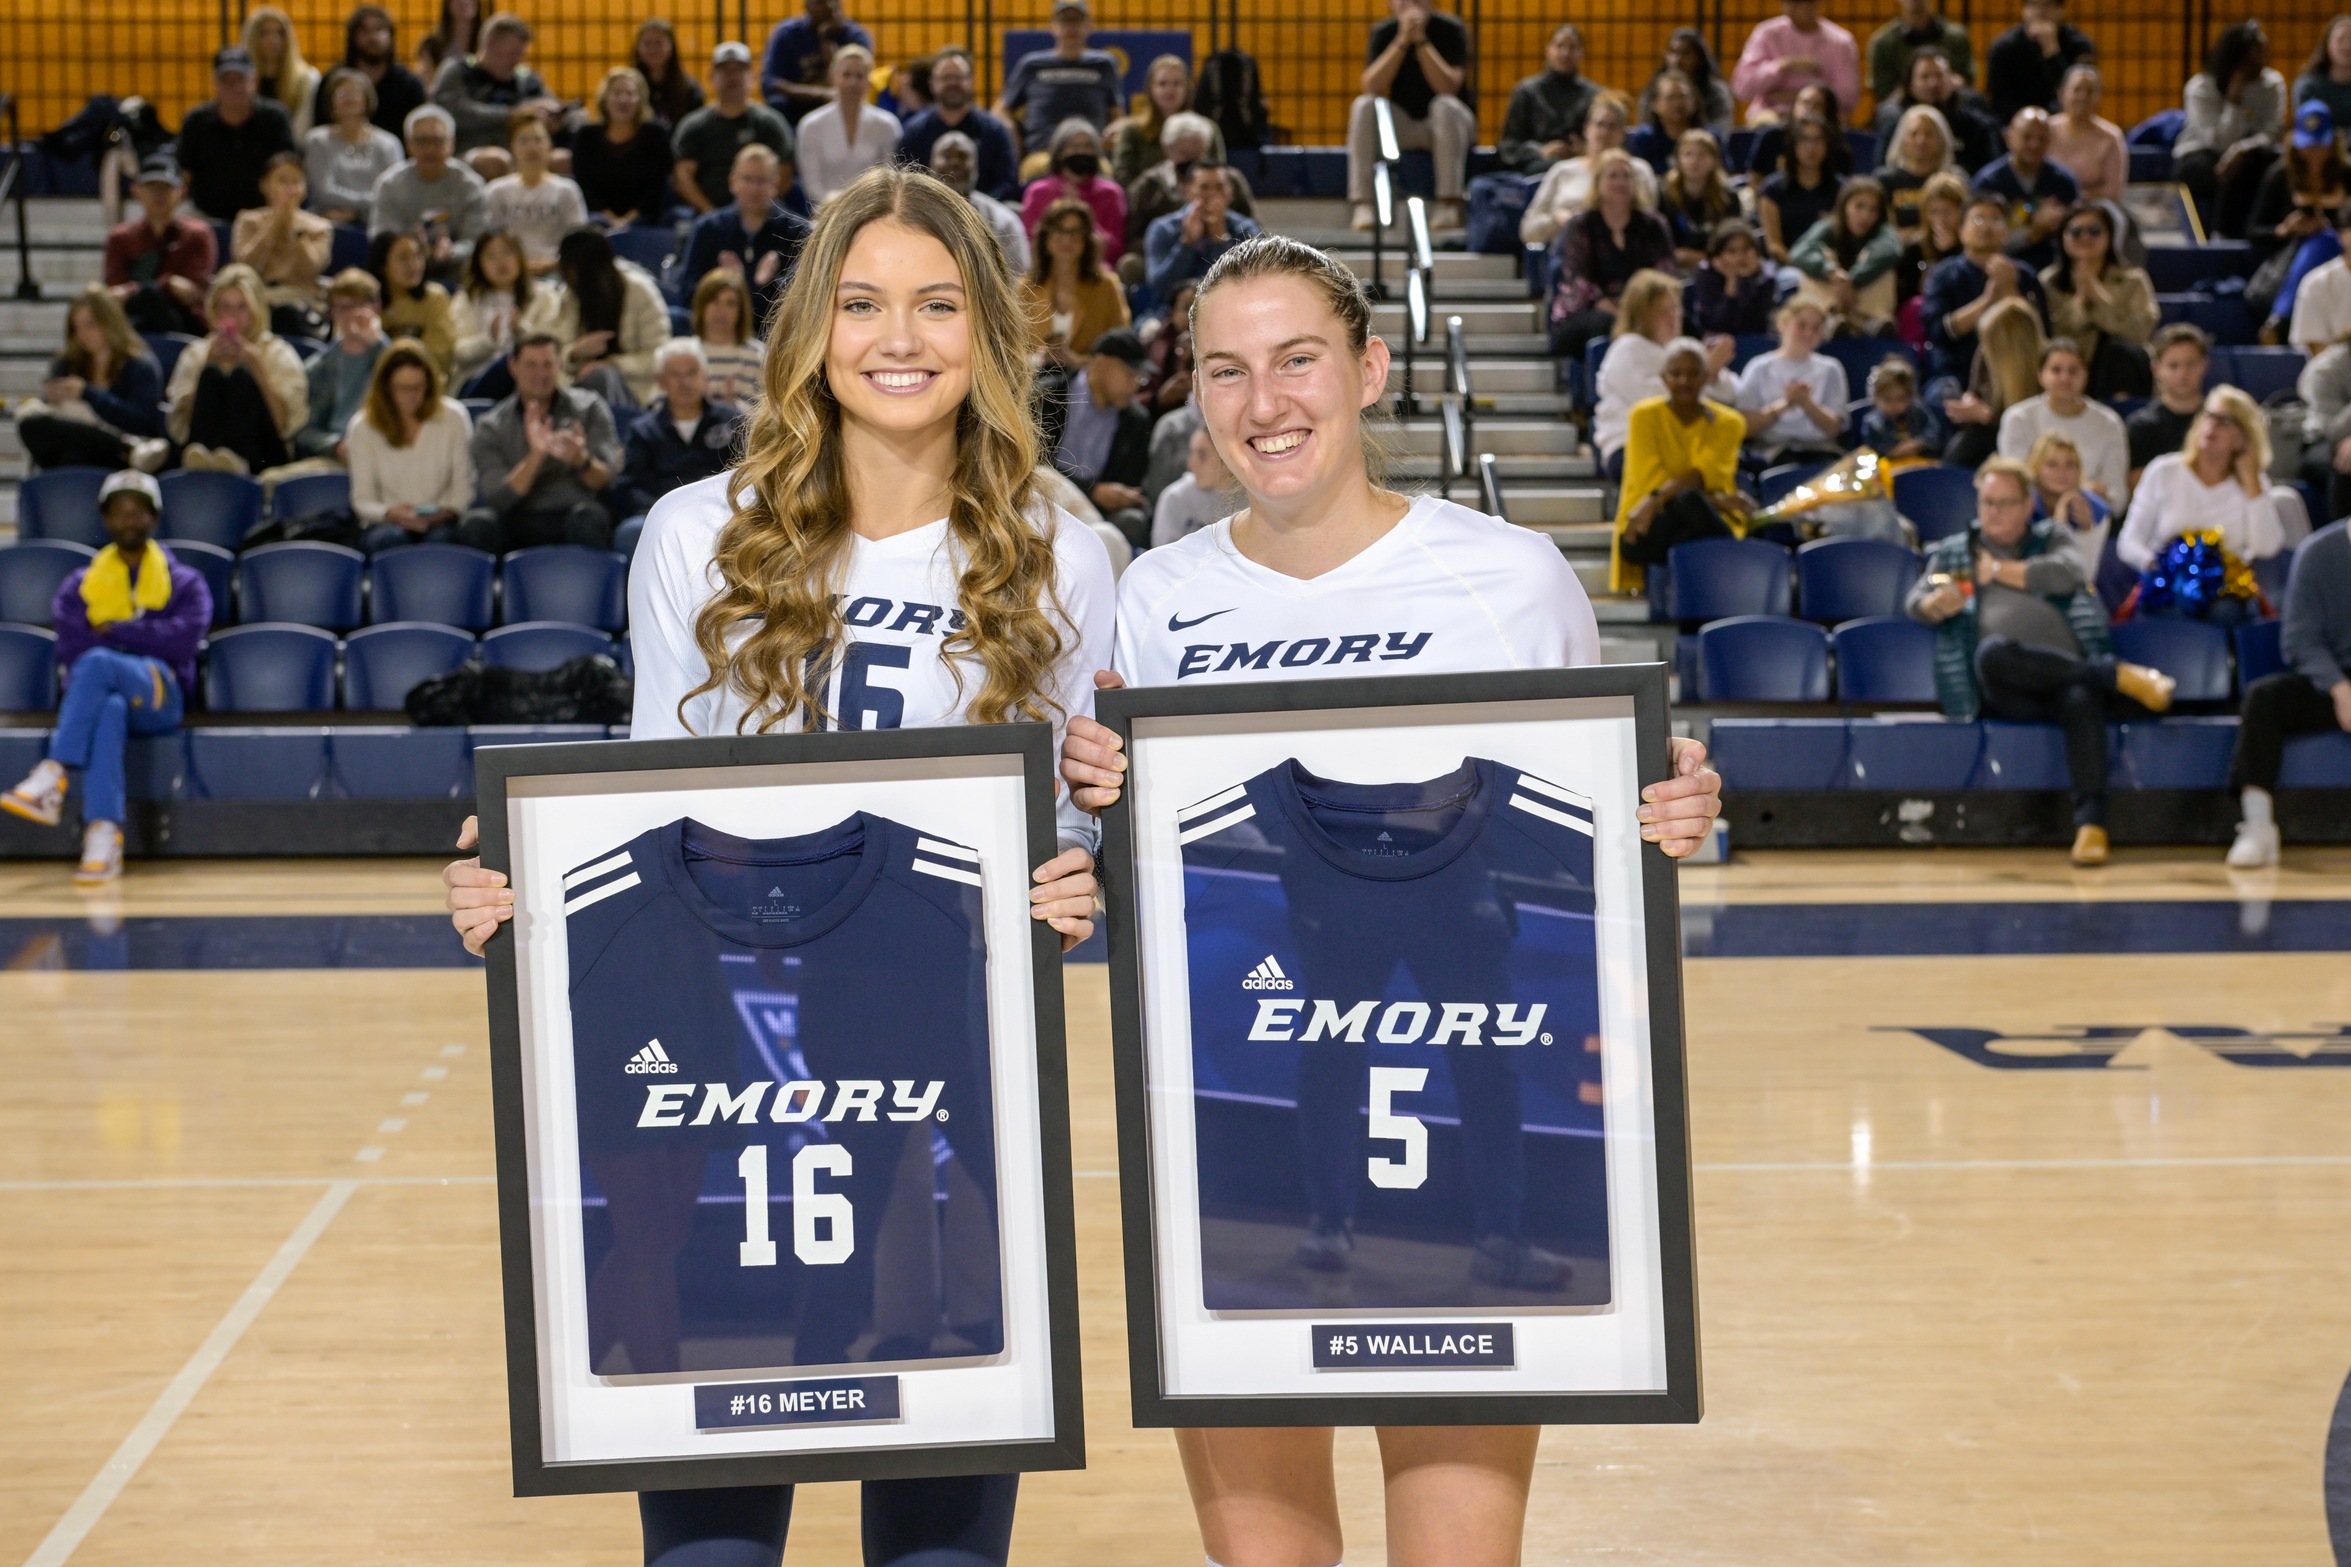 Volleyball Rallies for Two Wins During Emory Classic; Celebrate Seniors Friday Night